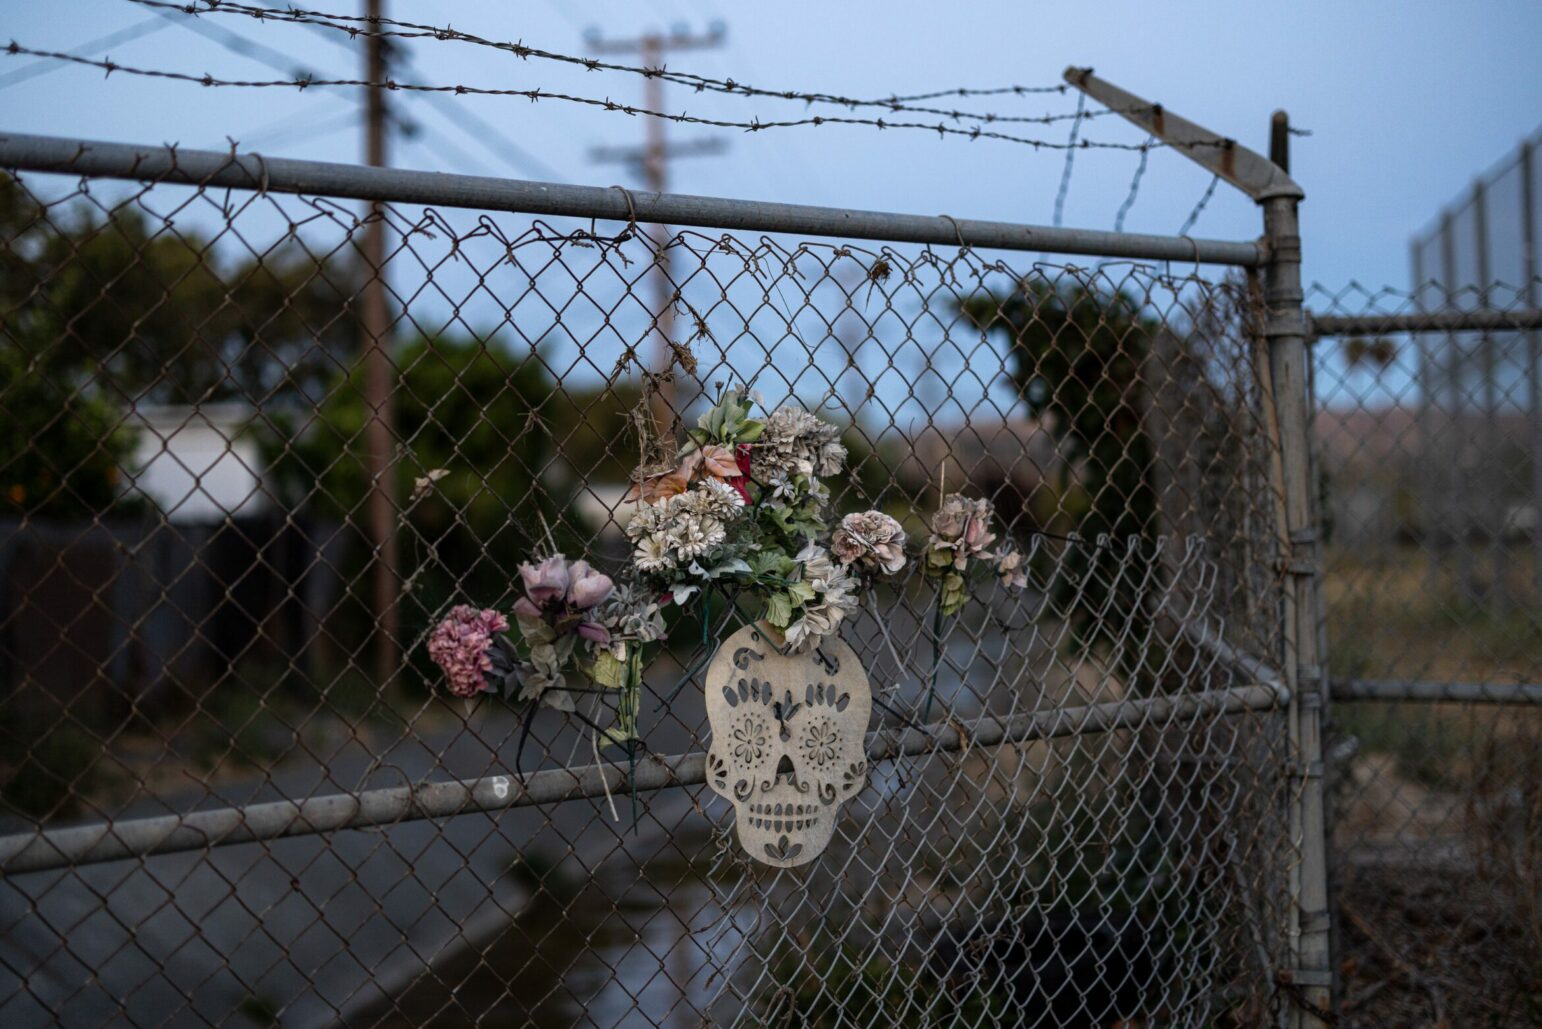 Artificial flowers frame a Día de los Muertos-style paper skull on a chain-link fence at dusk. There is barbed wire atop the fence and a canal in the background.